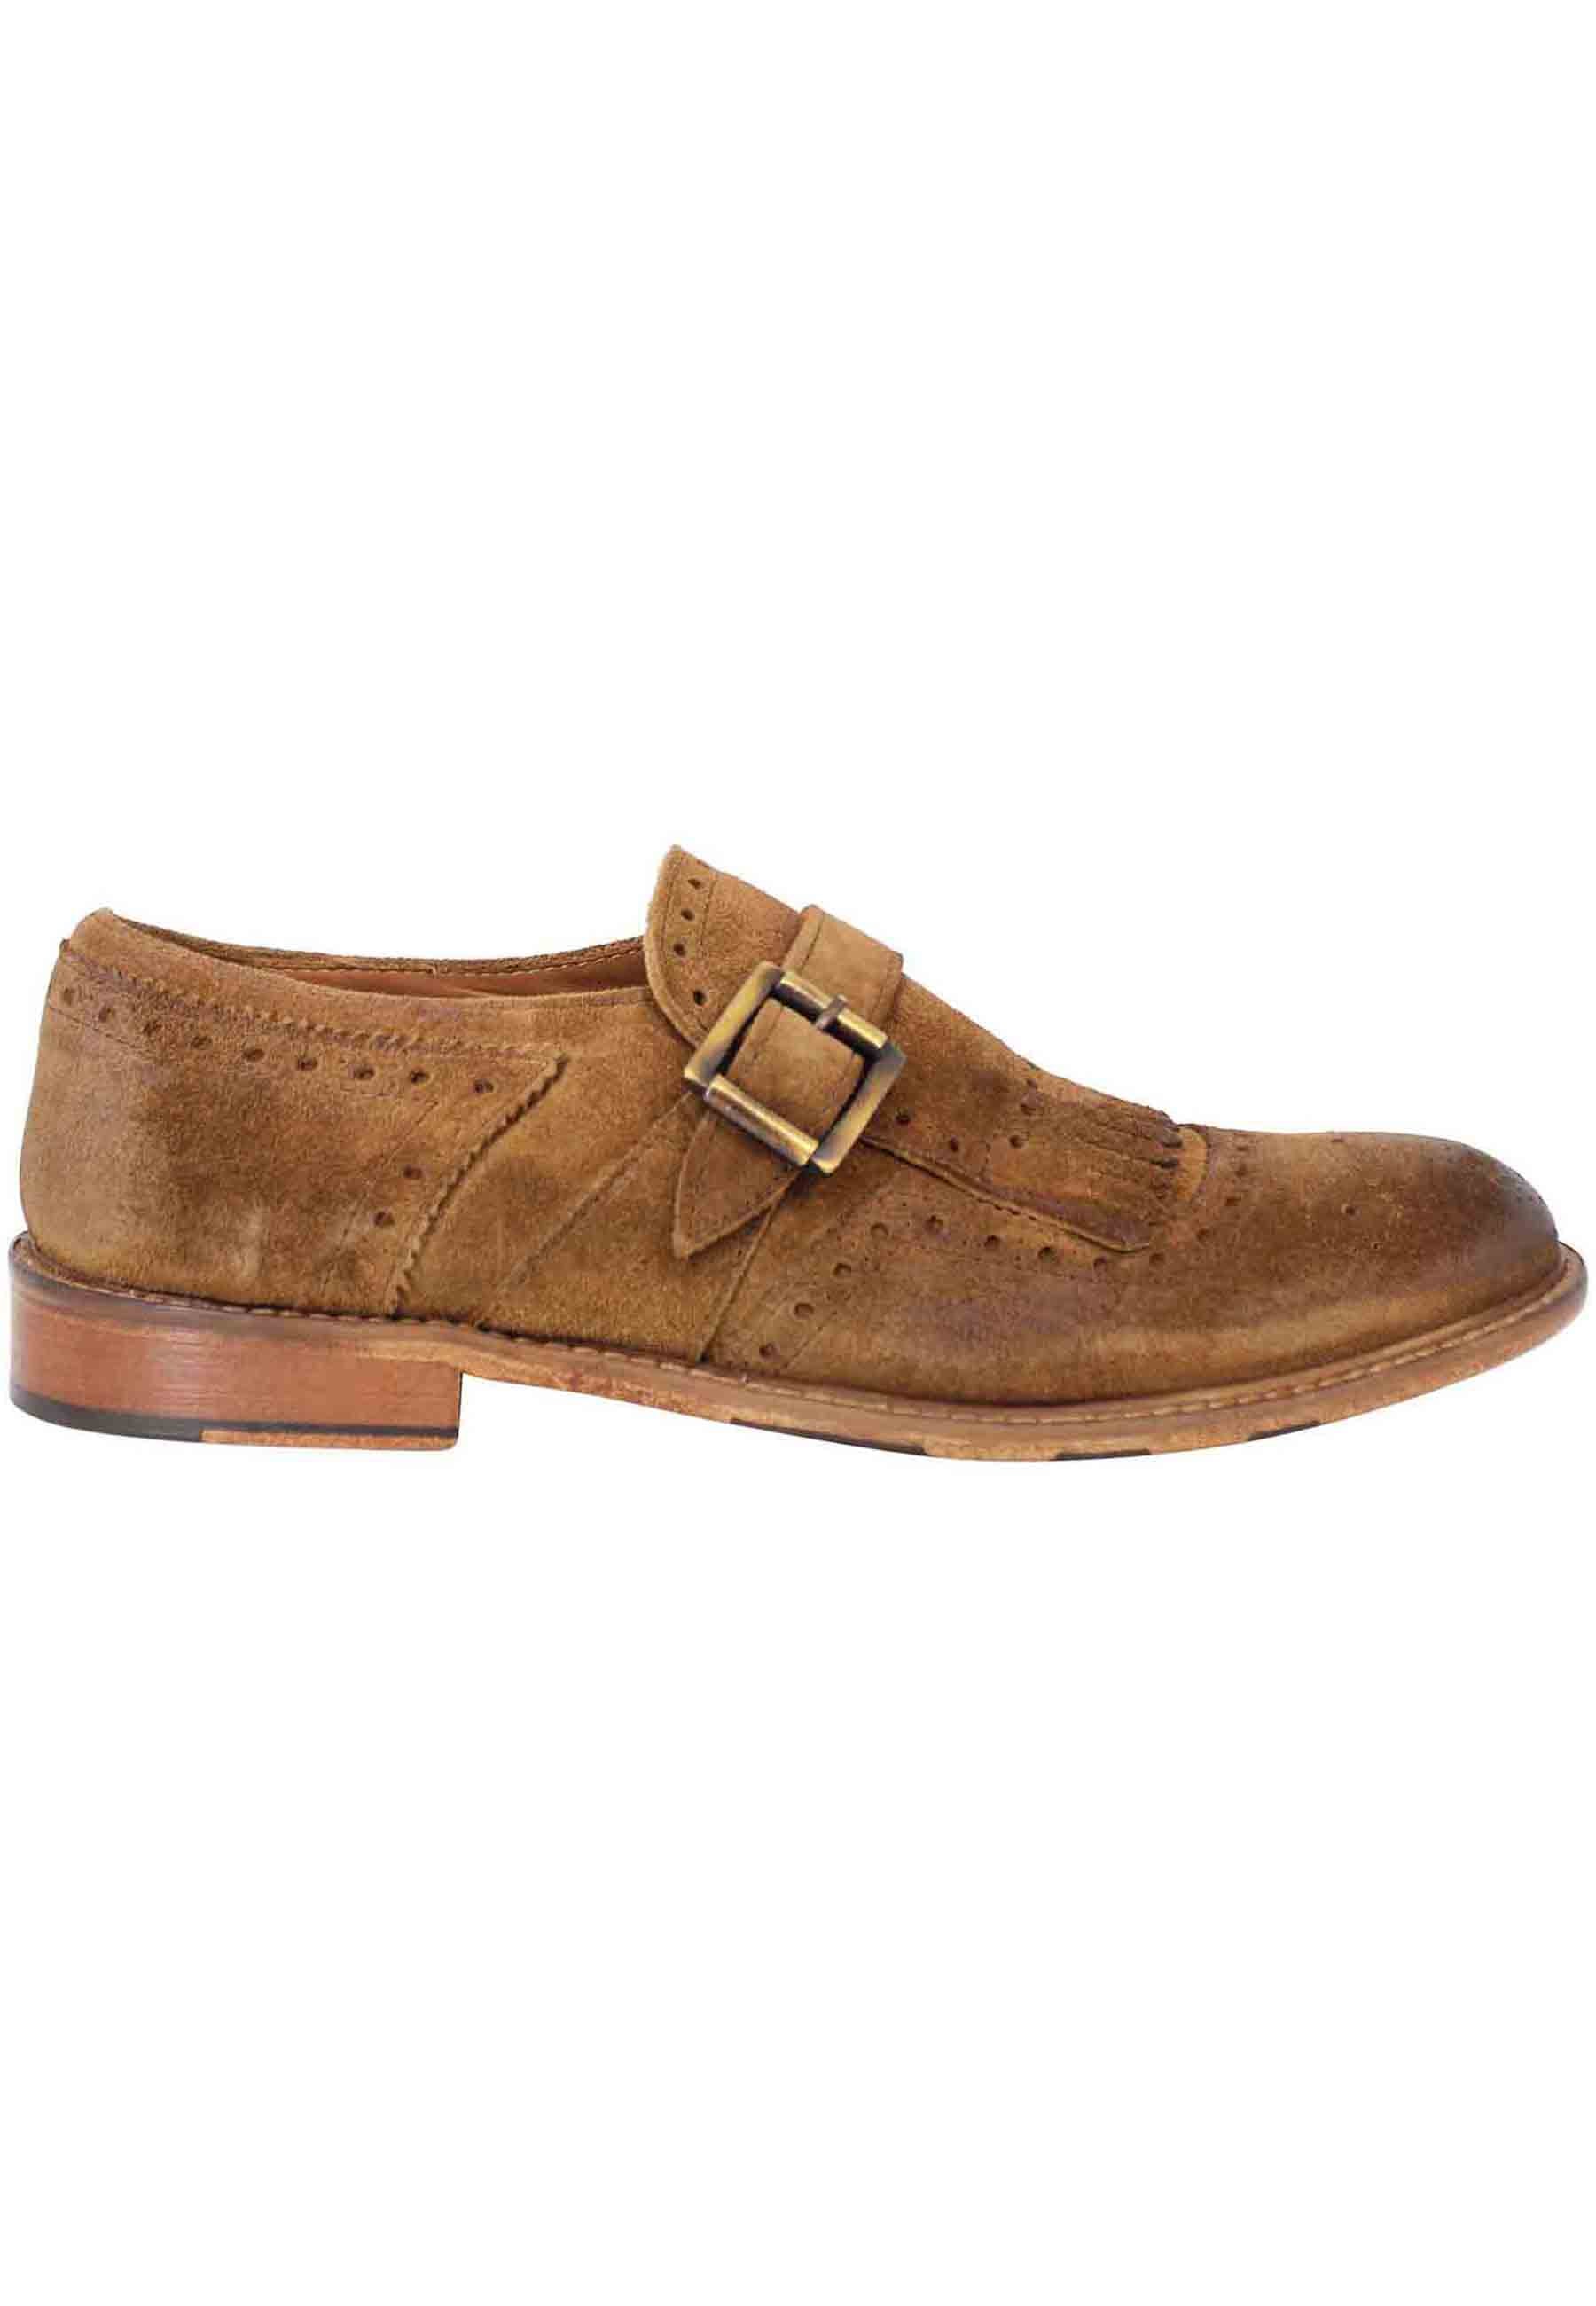 Men's loafers in leather suede with side buckle and fringes